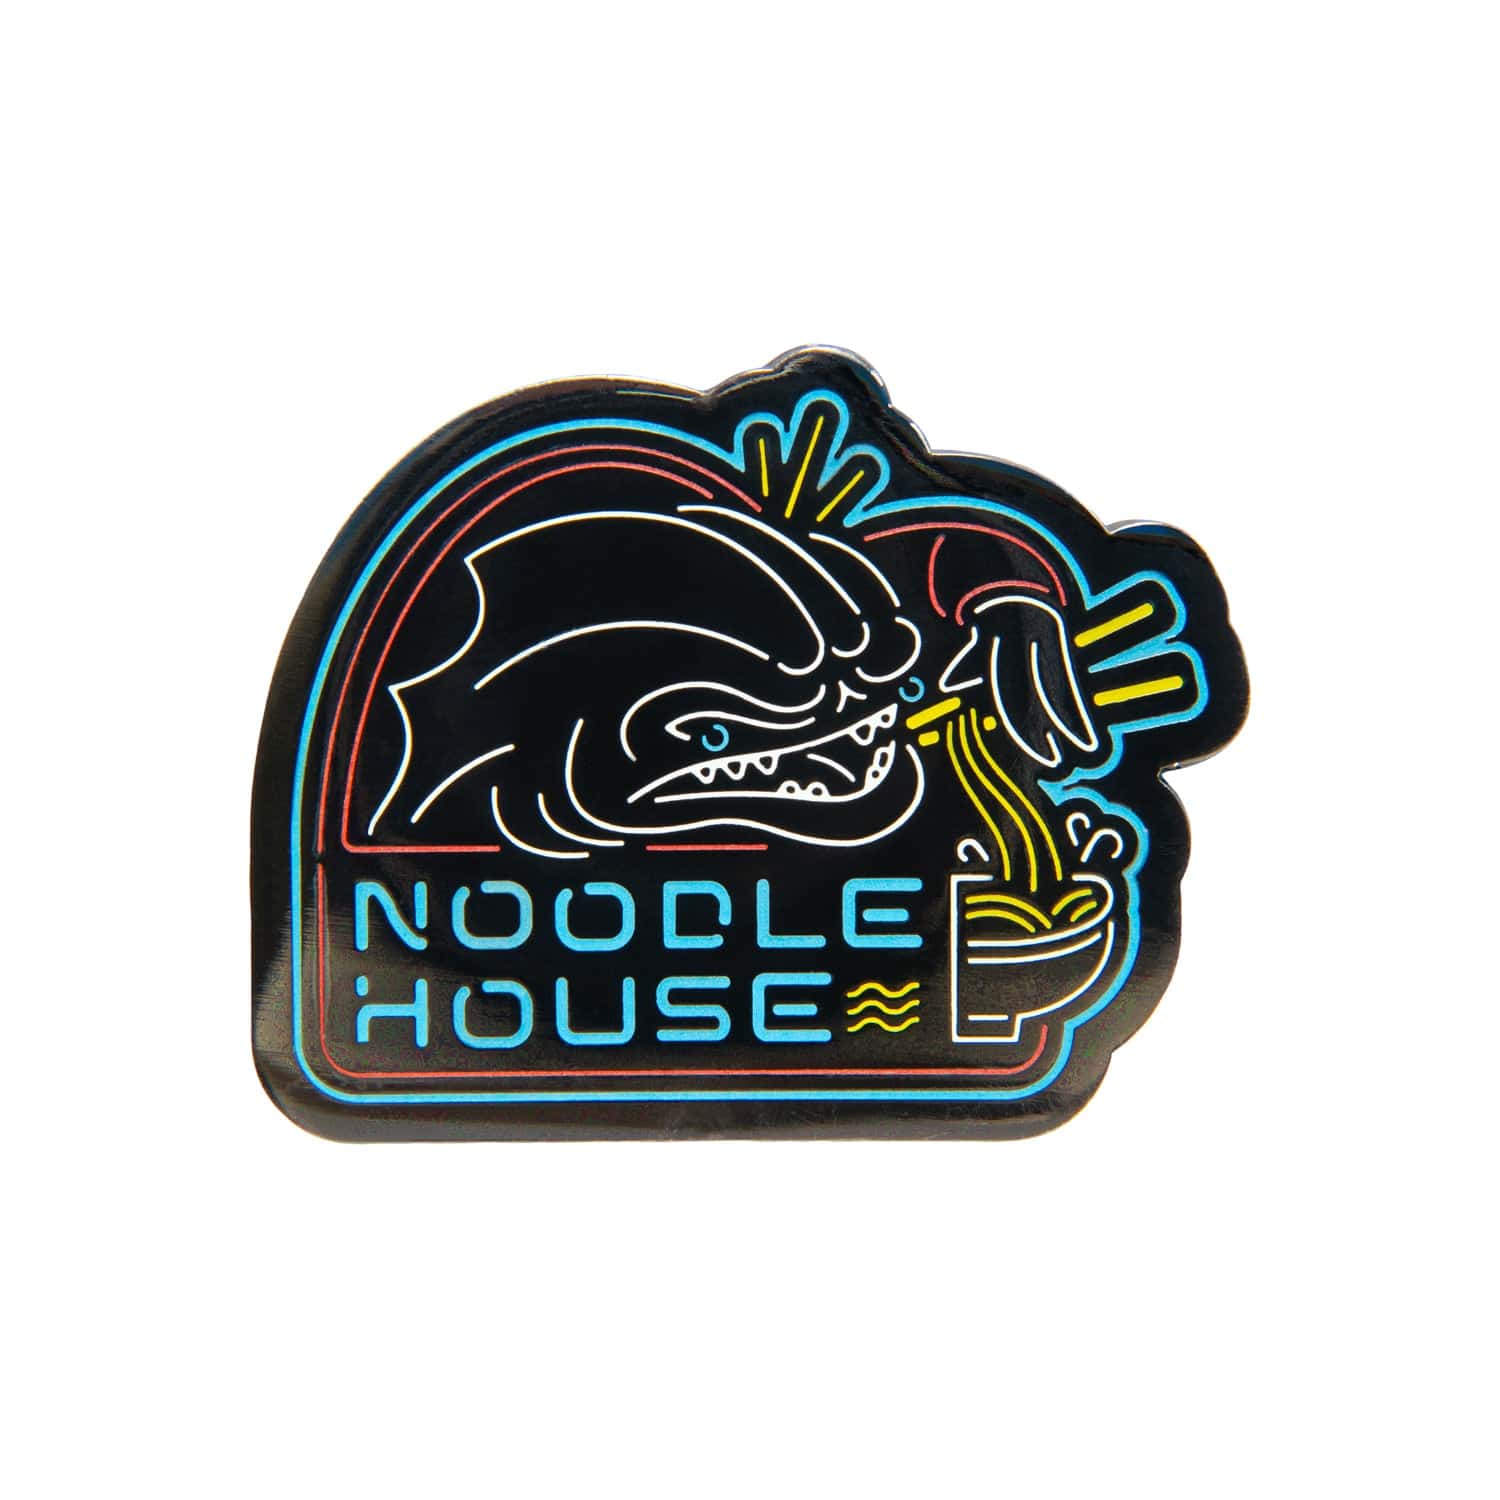 Mass Effect - Noodle House Glow-in-the-Dark Pin